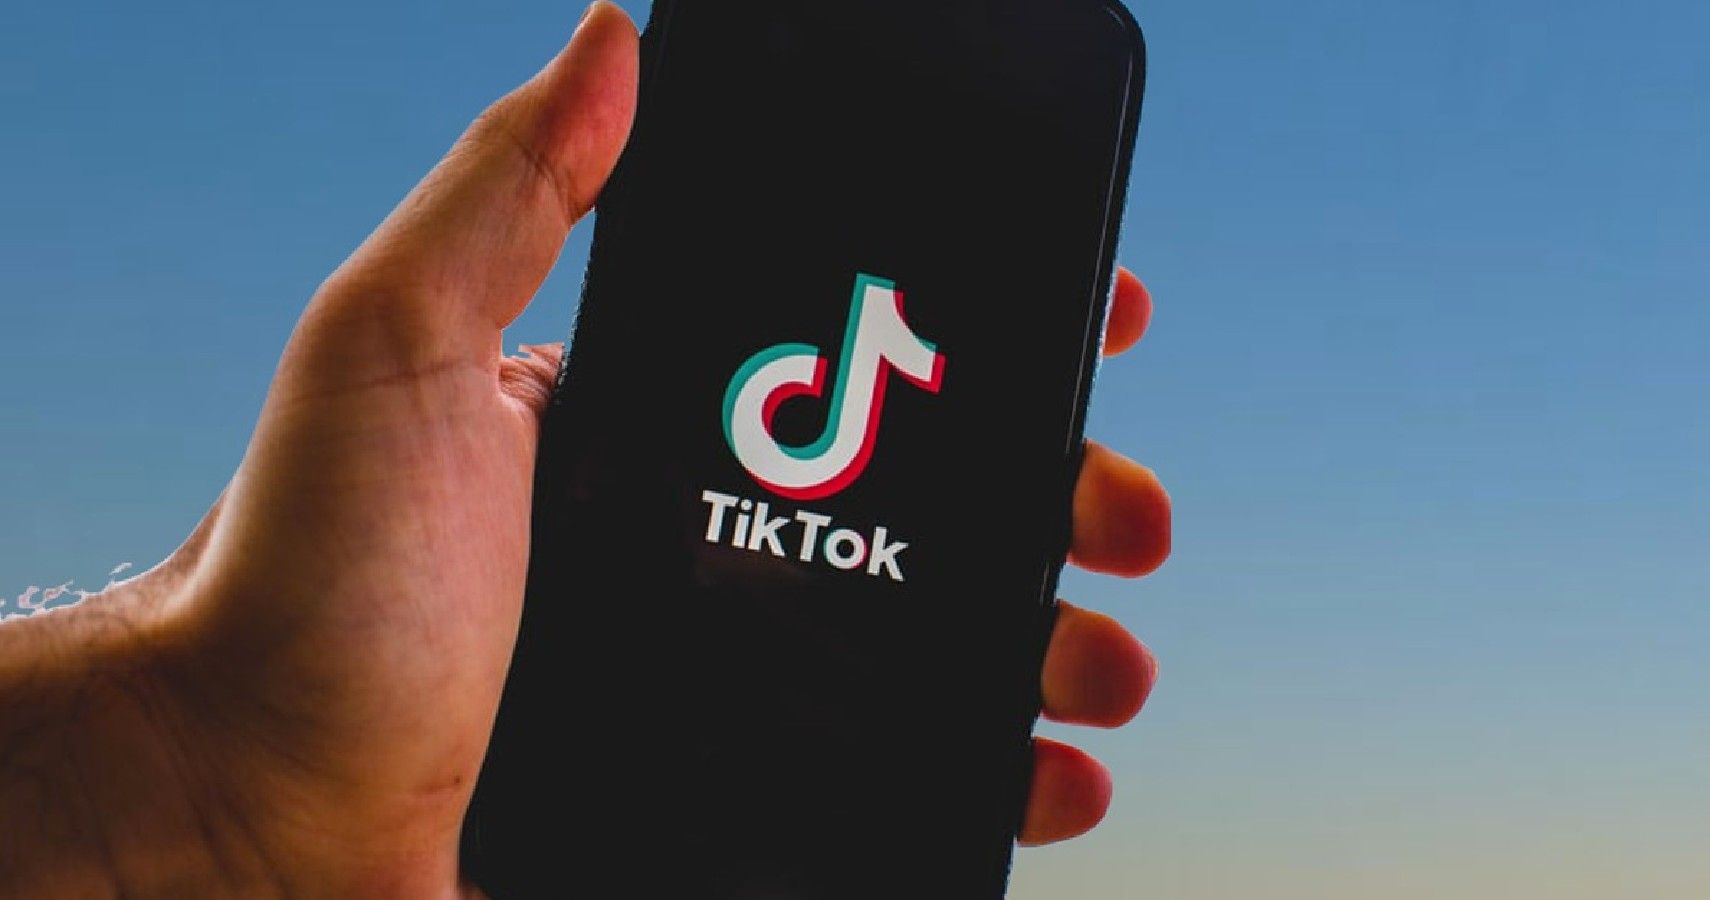 Picture of phone and TikTok logo on the screen